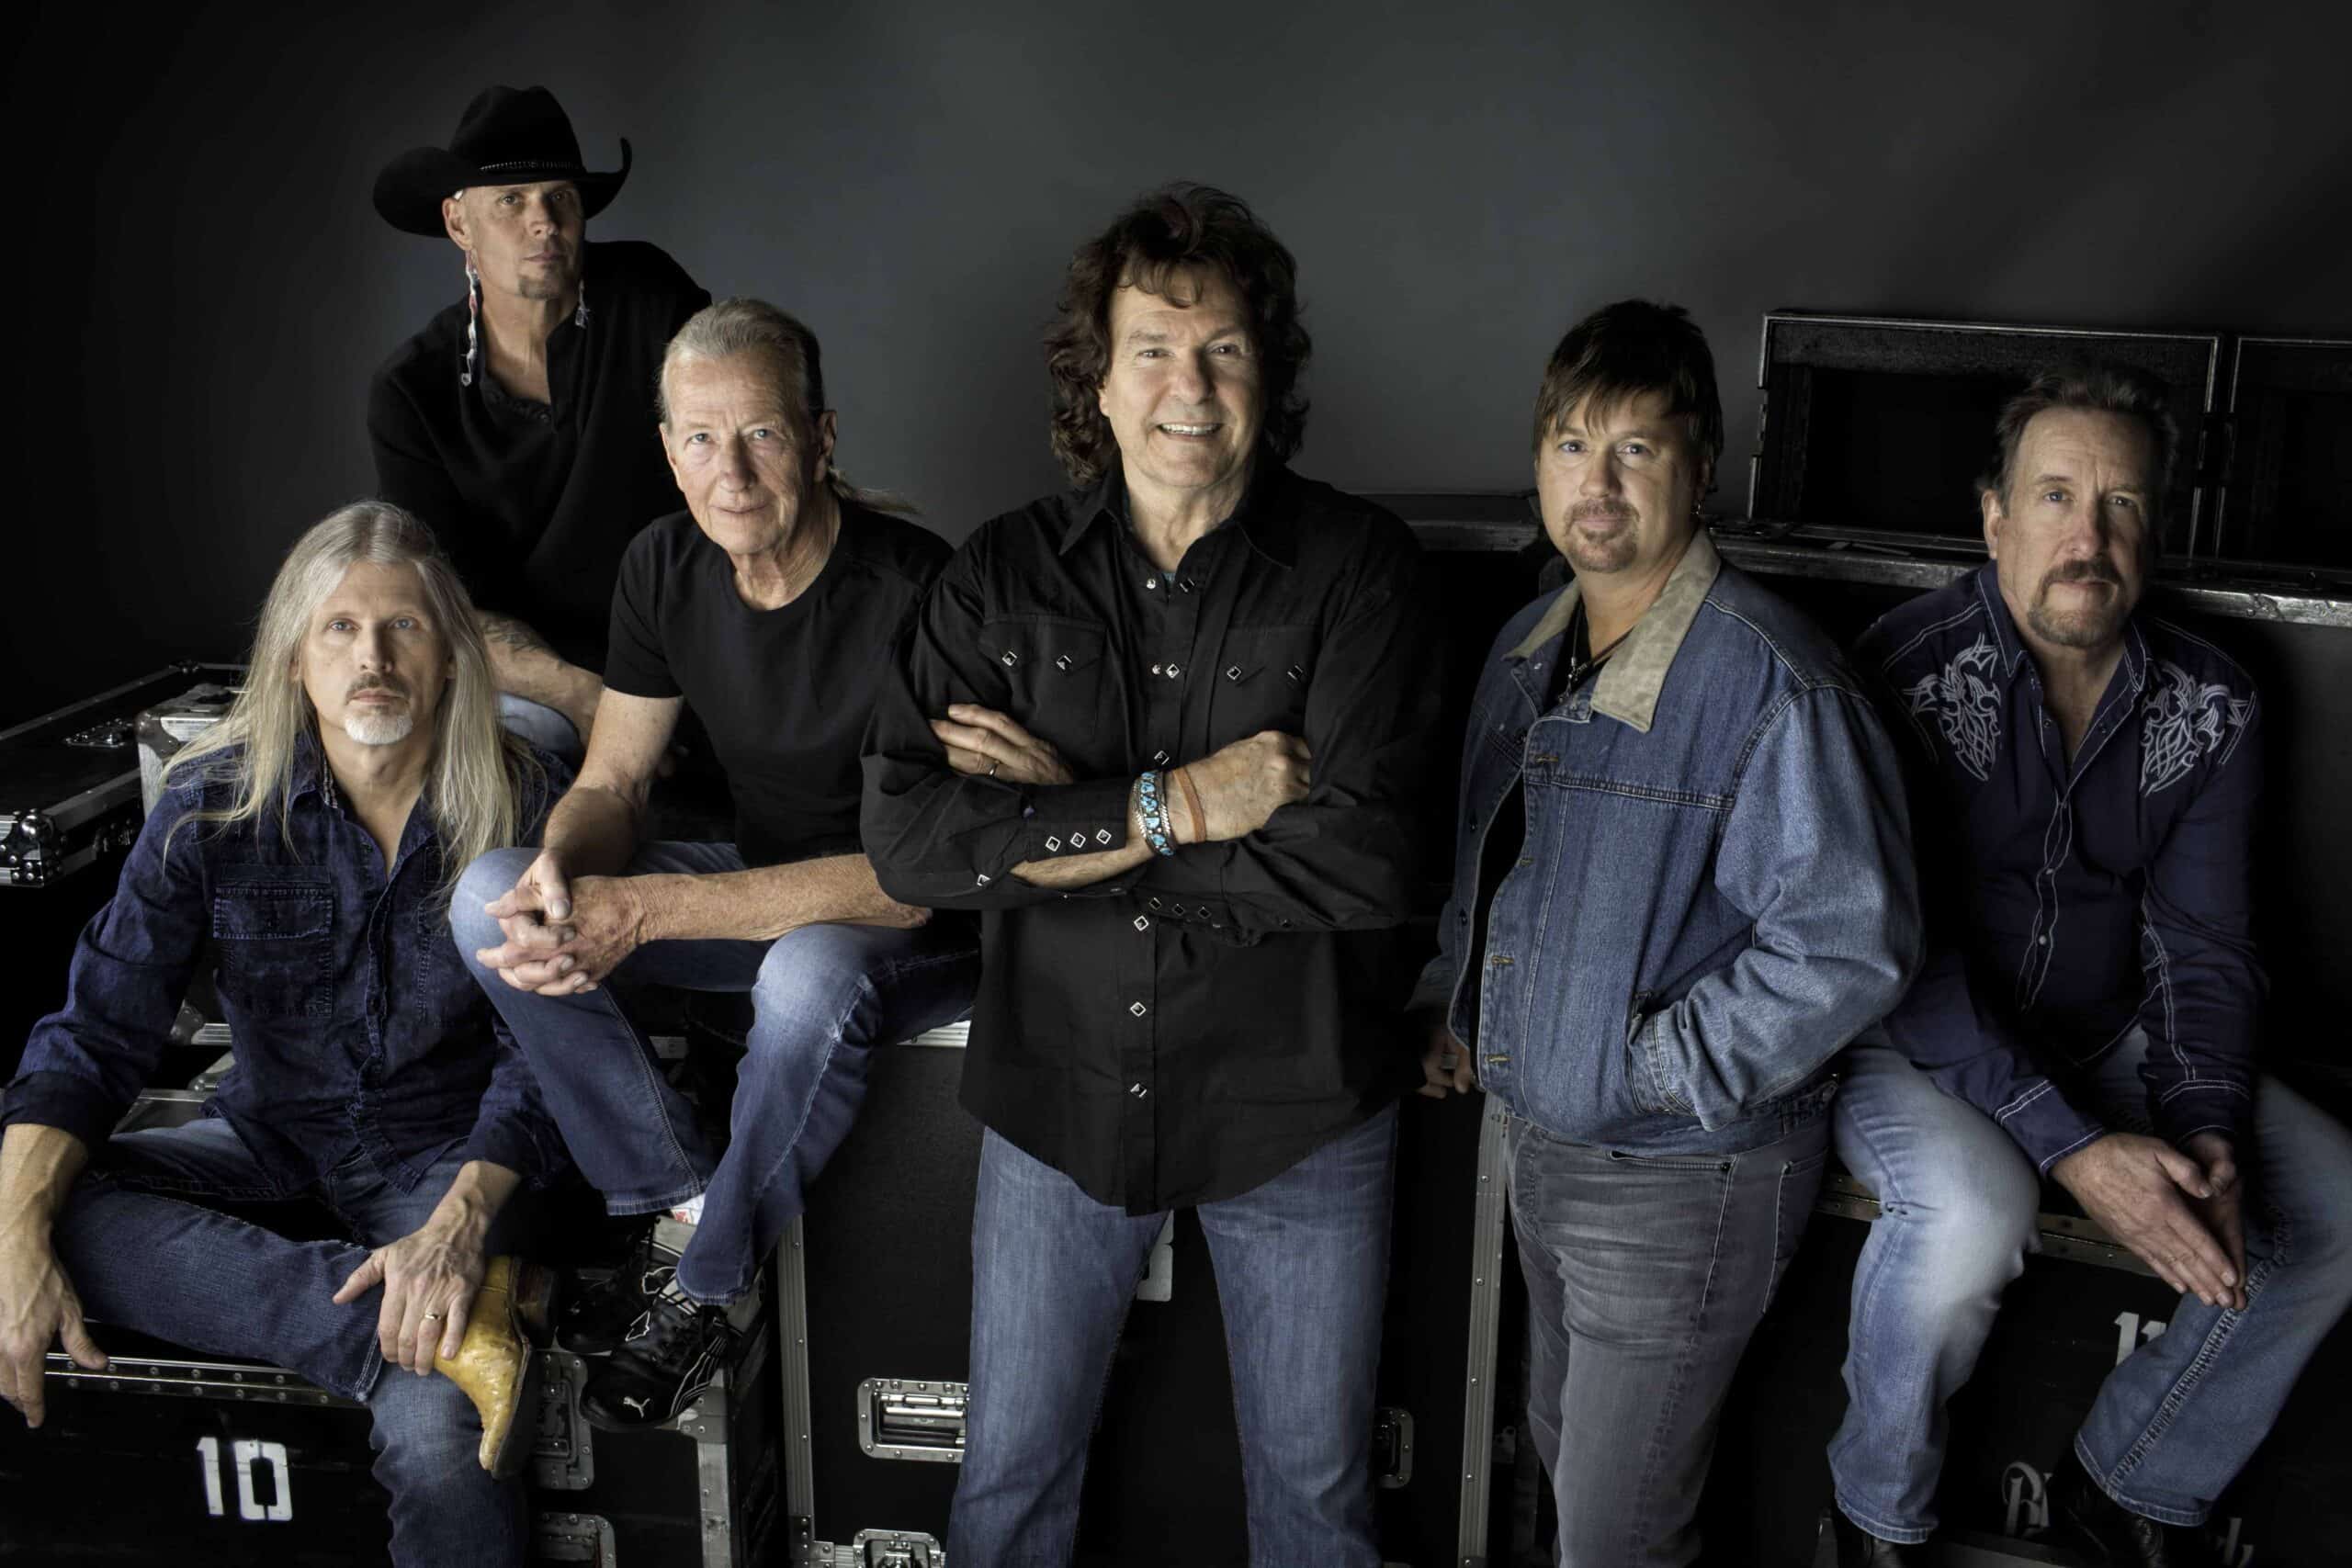 Southern rock legends The Outlaws to perform at FMU PAC